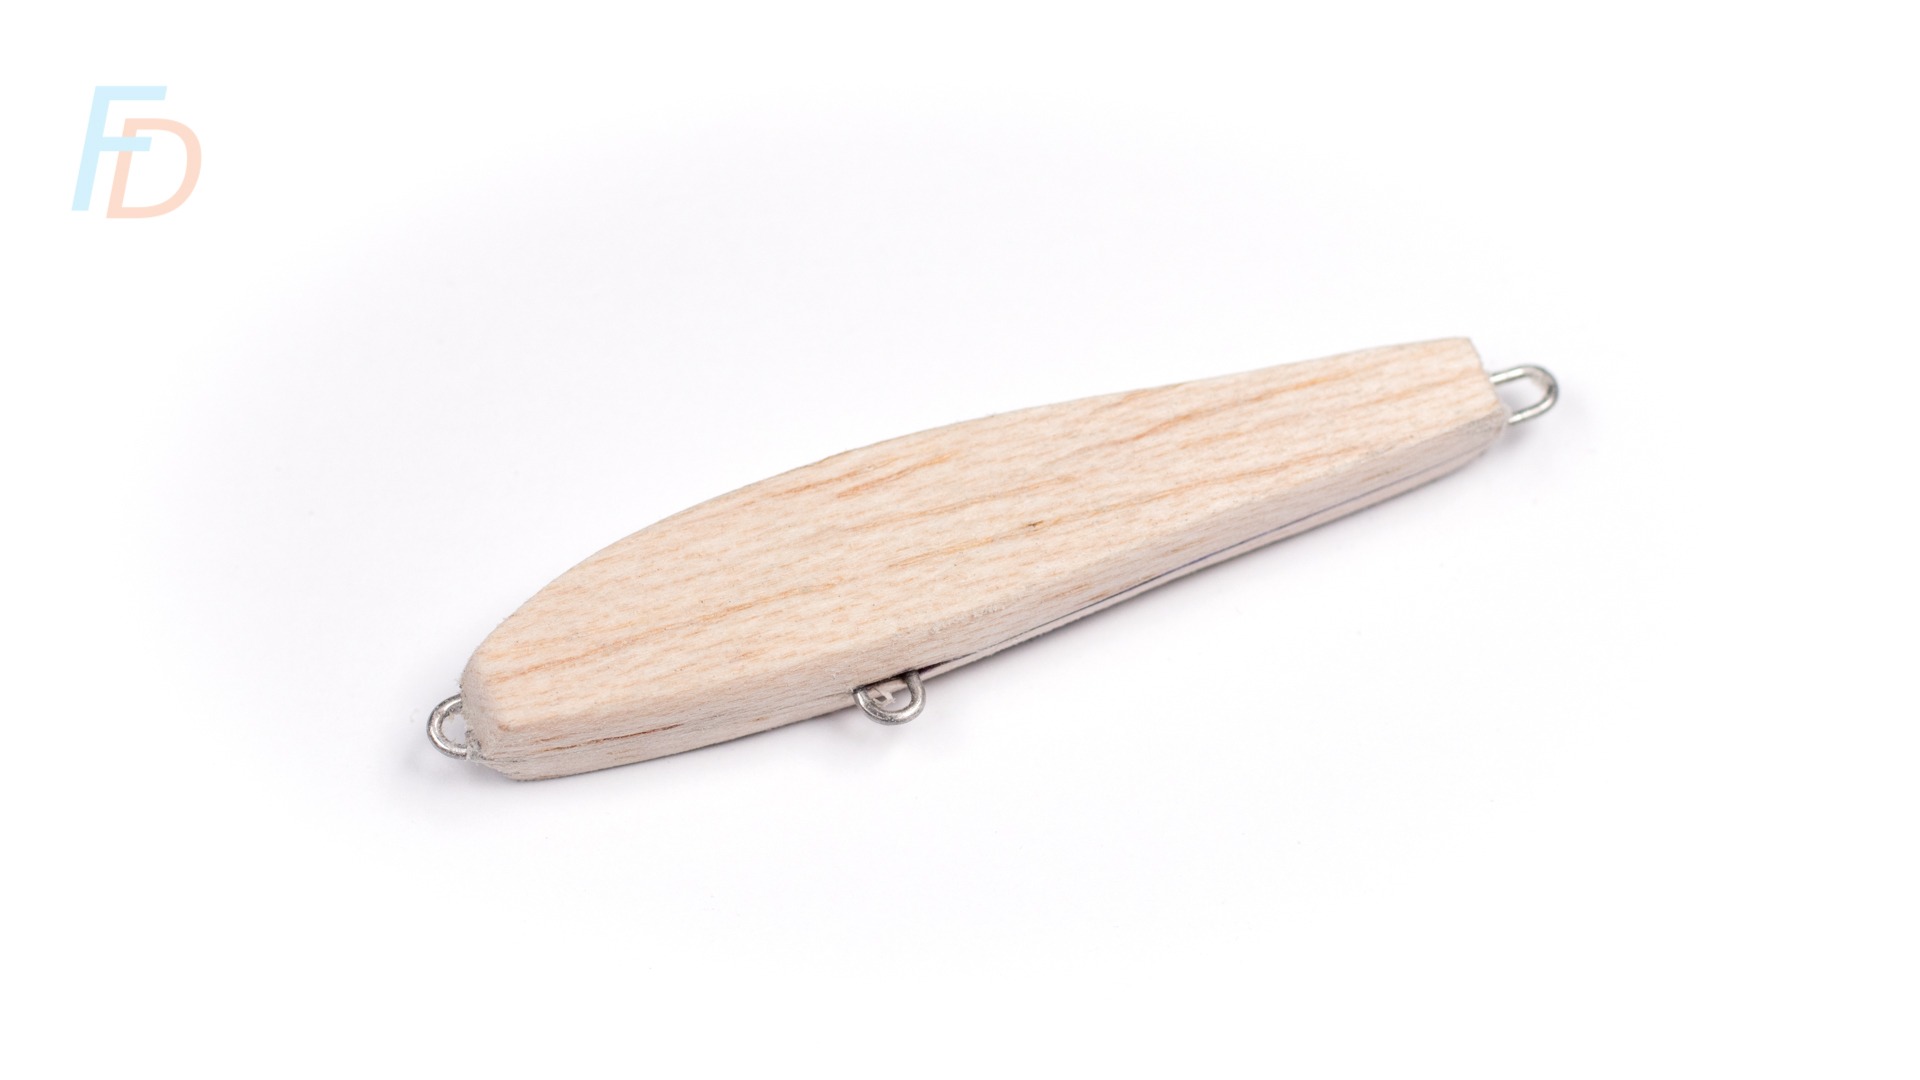 Wood Fishing Lure Box With Opening on Top for Picture or Saying or Favorite  Lure. 